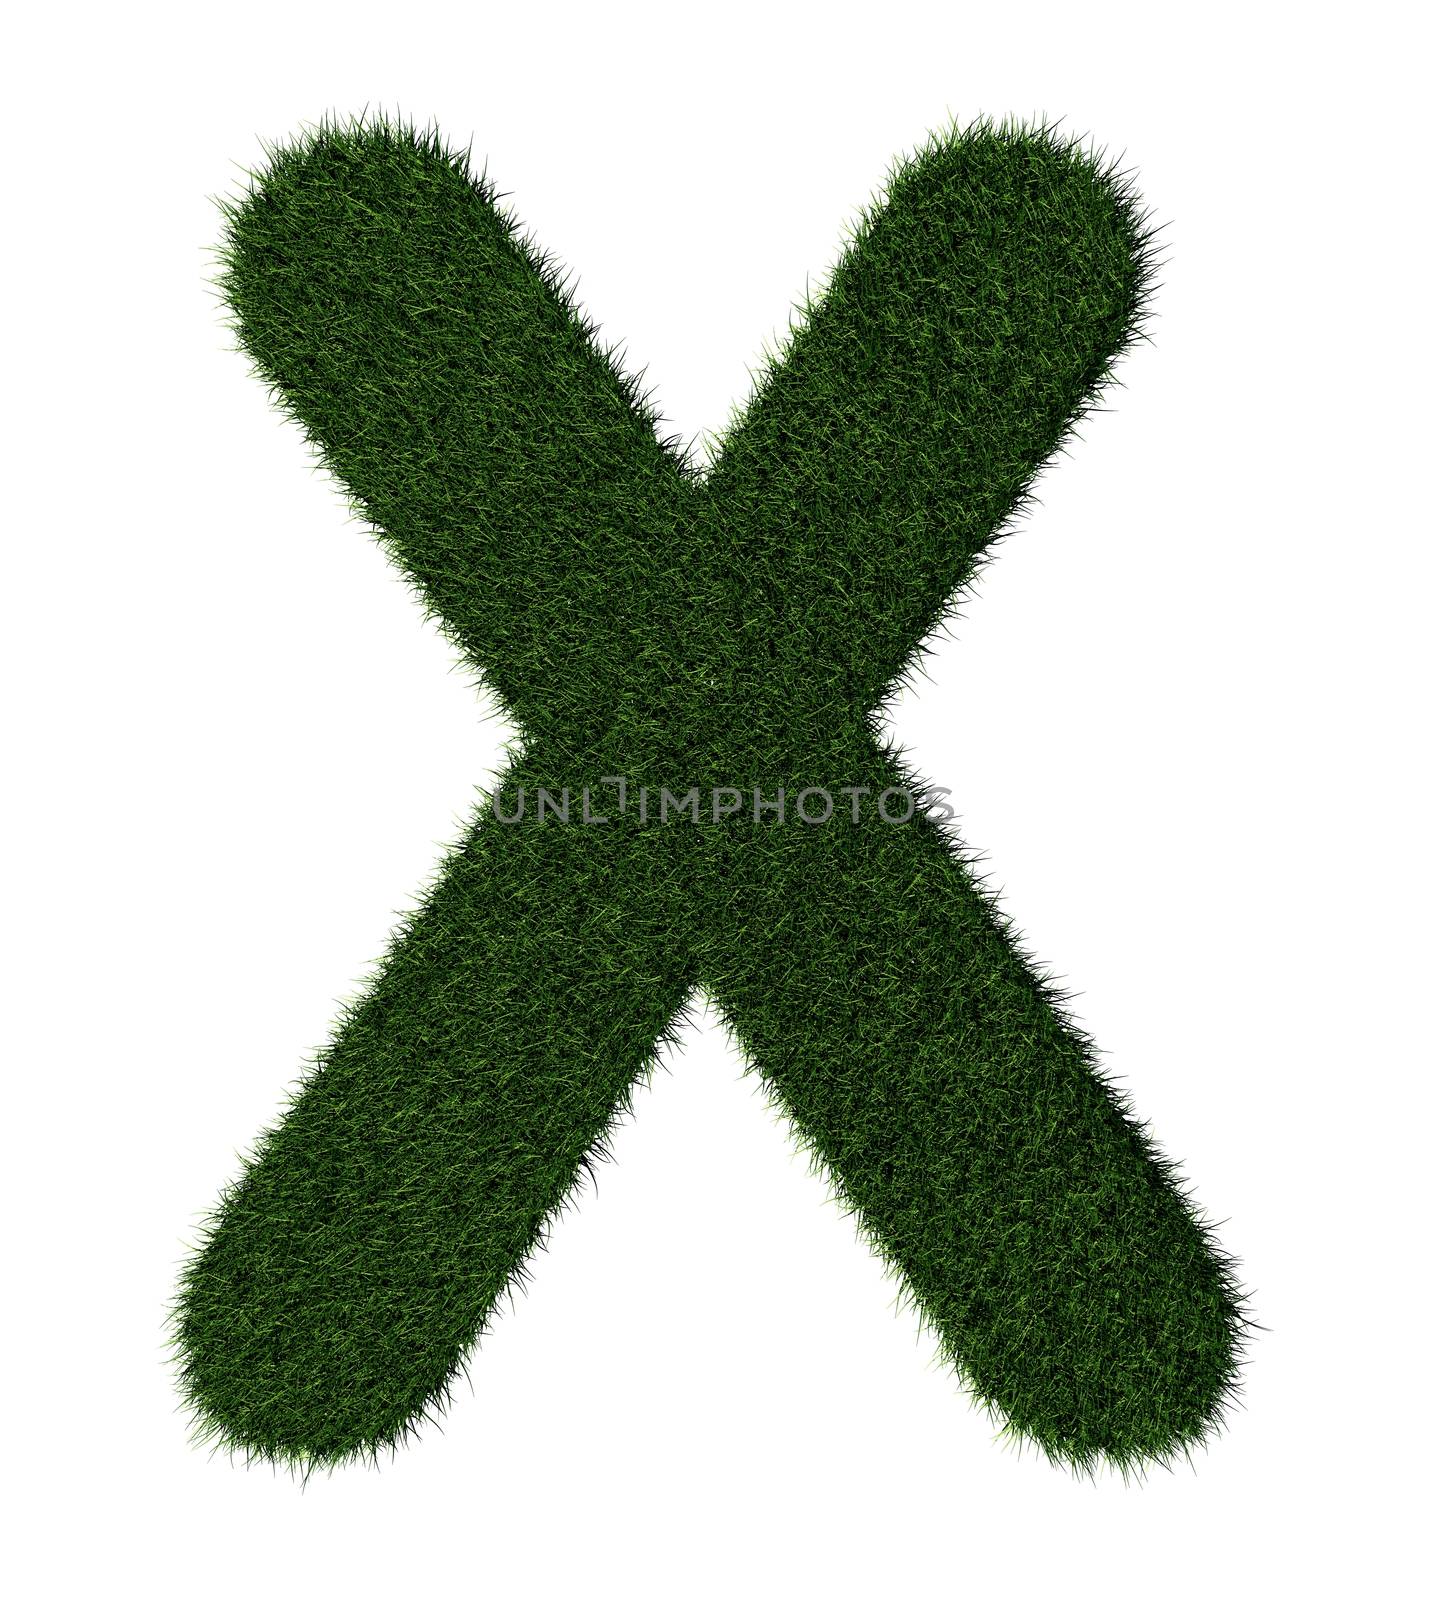 Letter X made with blades of grass